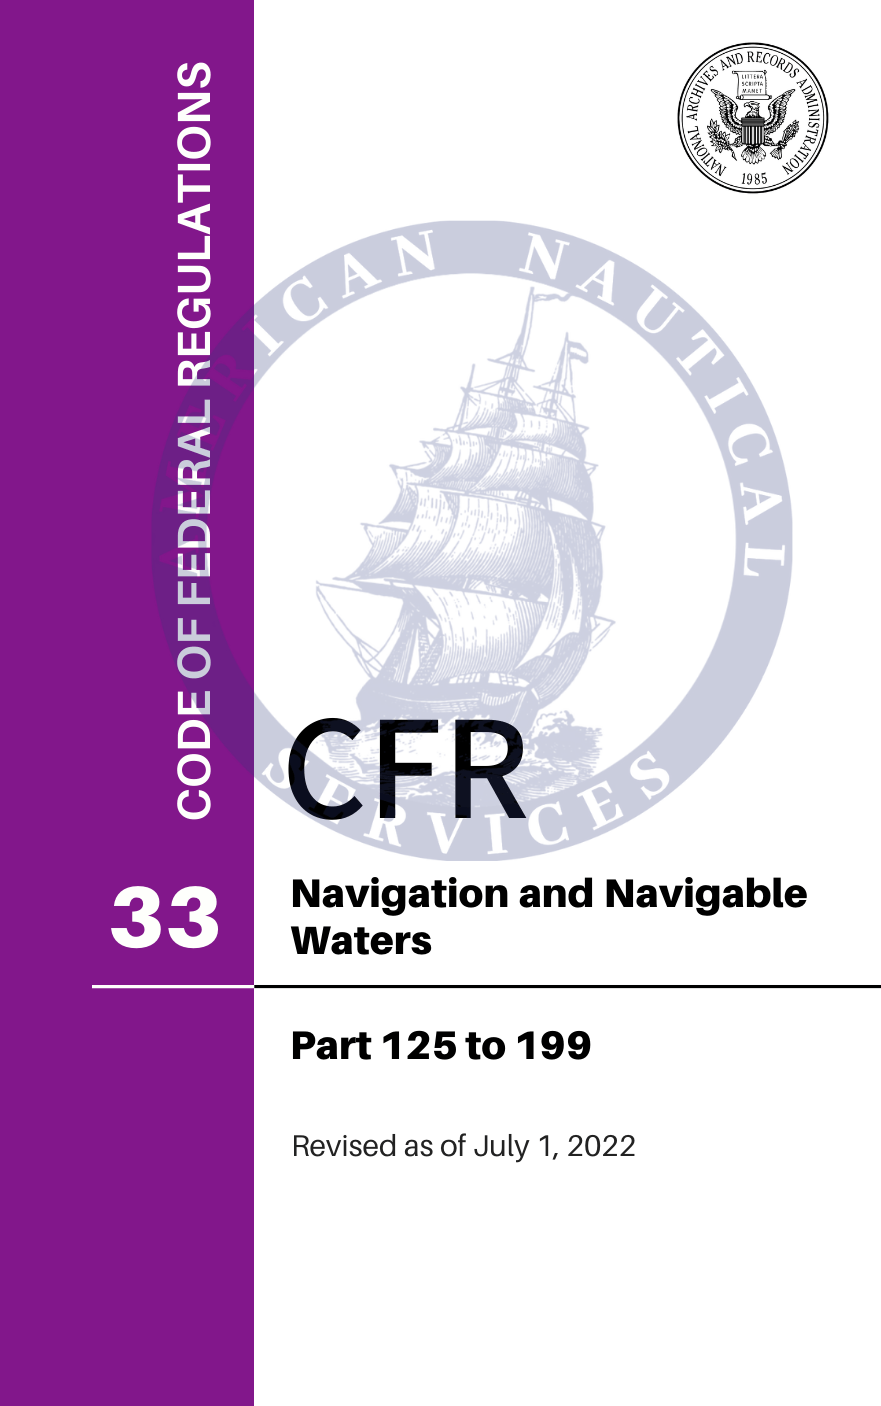 CFR Title 33: Parts 125-199 - Navigation and Navigable Waters (Code of Federal Regulations) Revised as of July 1, 2022